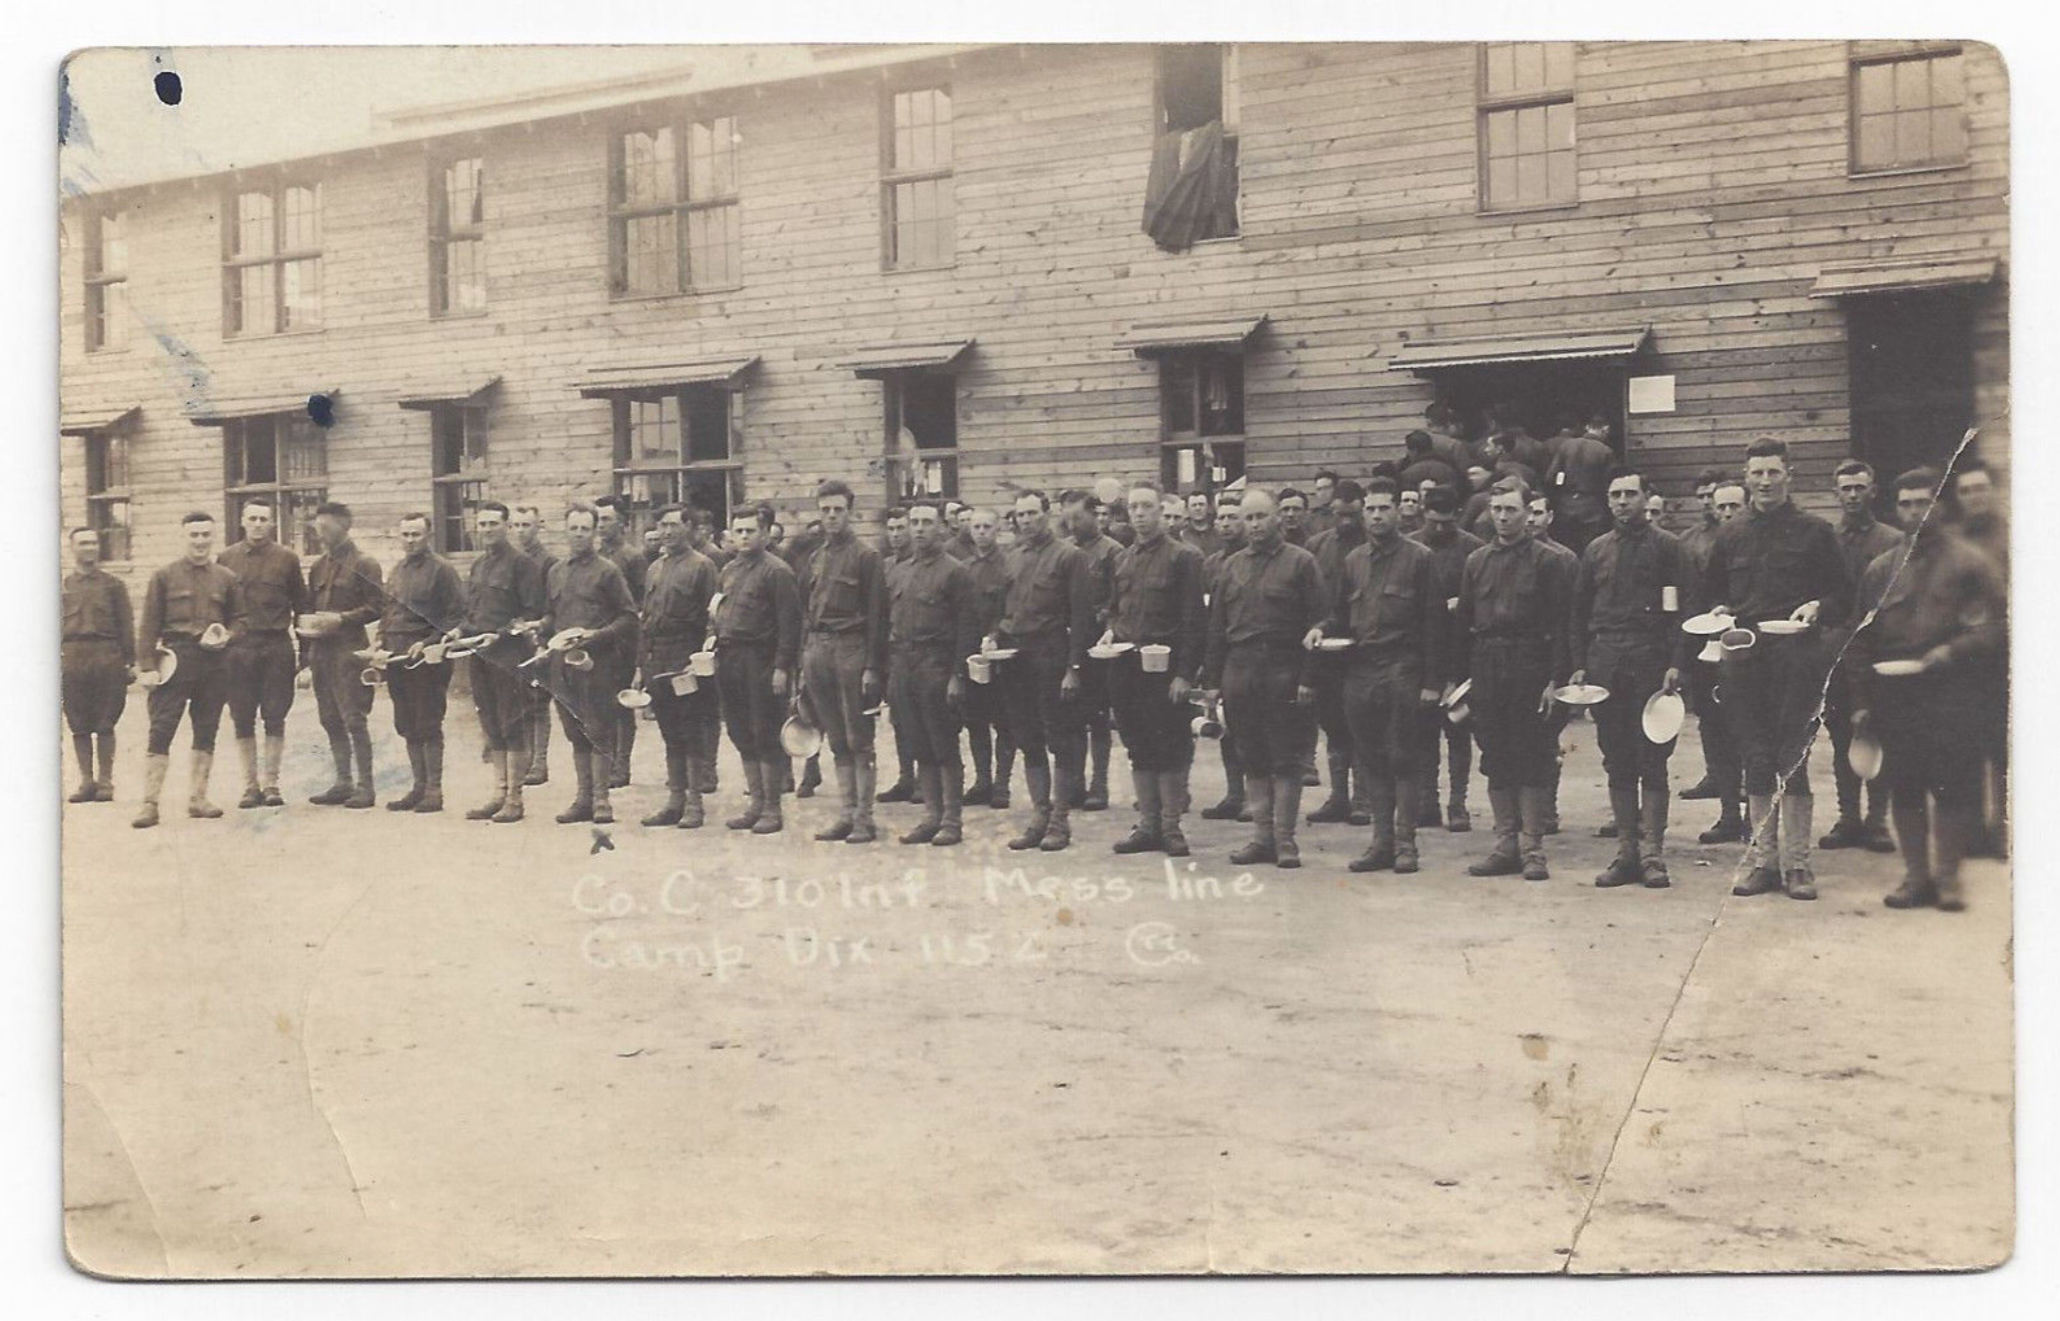 Camp Dix - Company C, 310th Infantry in Mess line - 1917